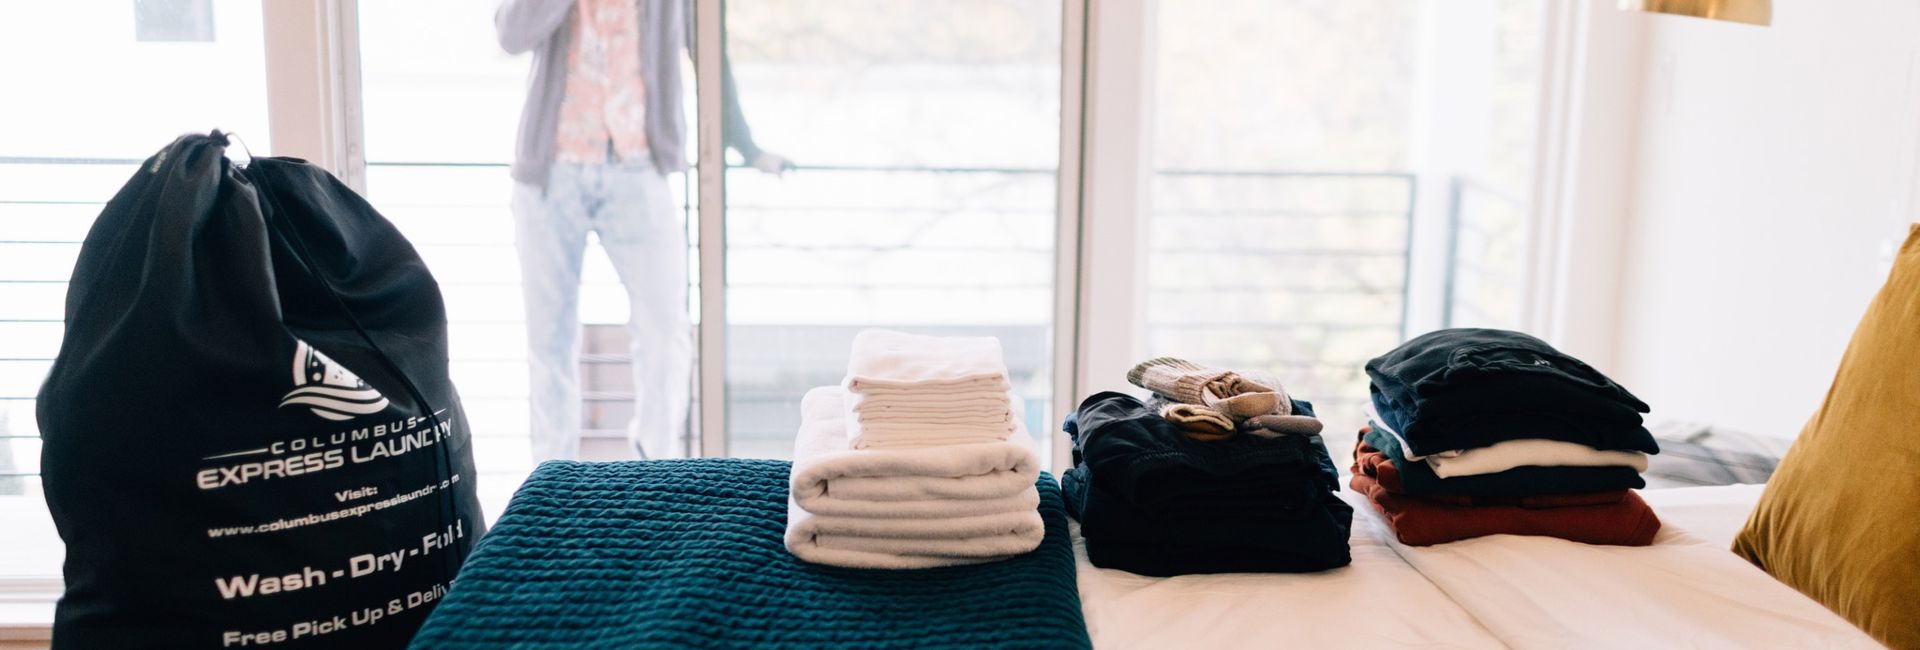 Laundry Service In Hilliard, OH